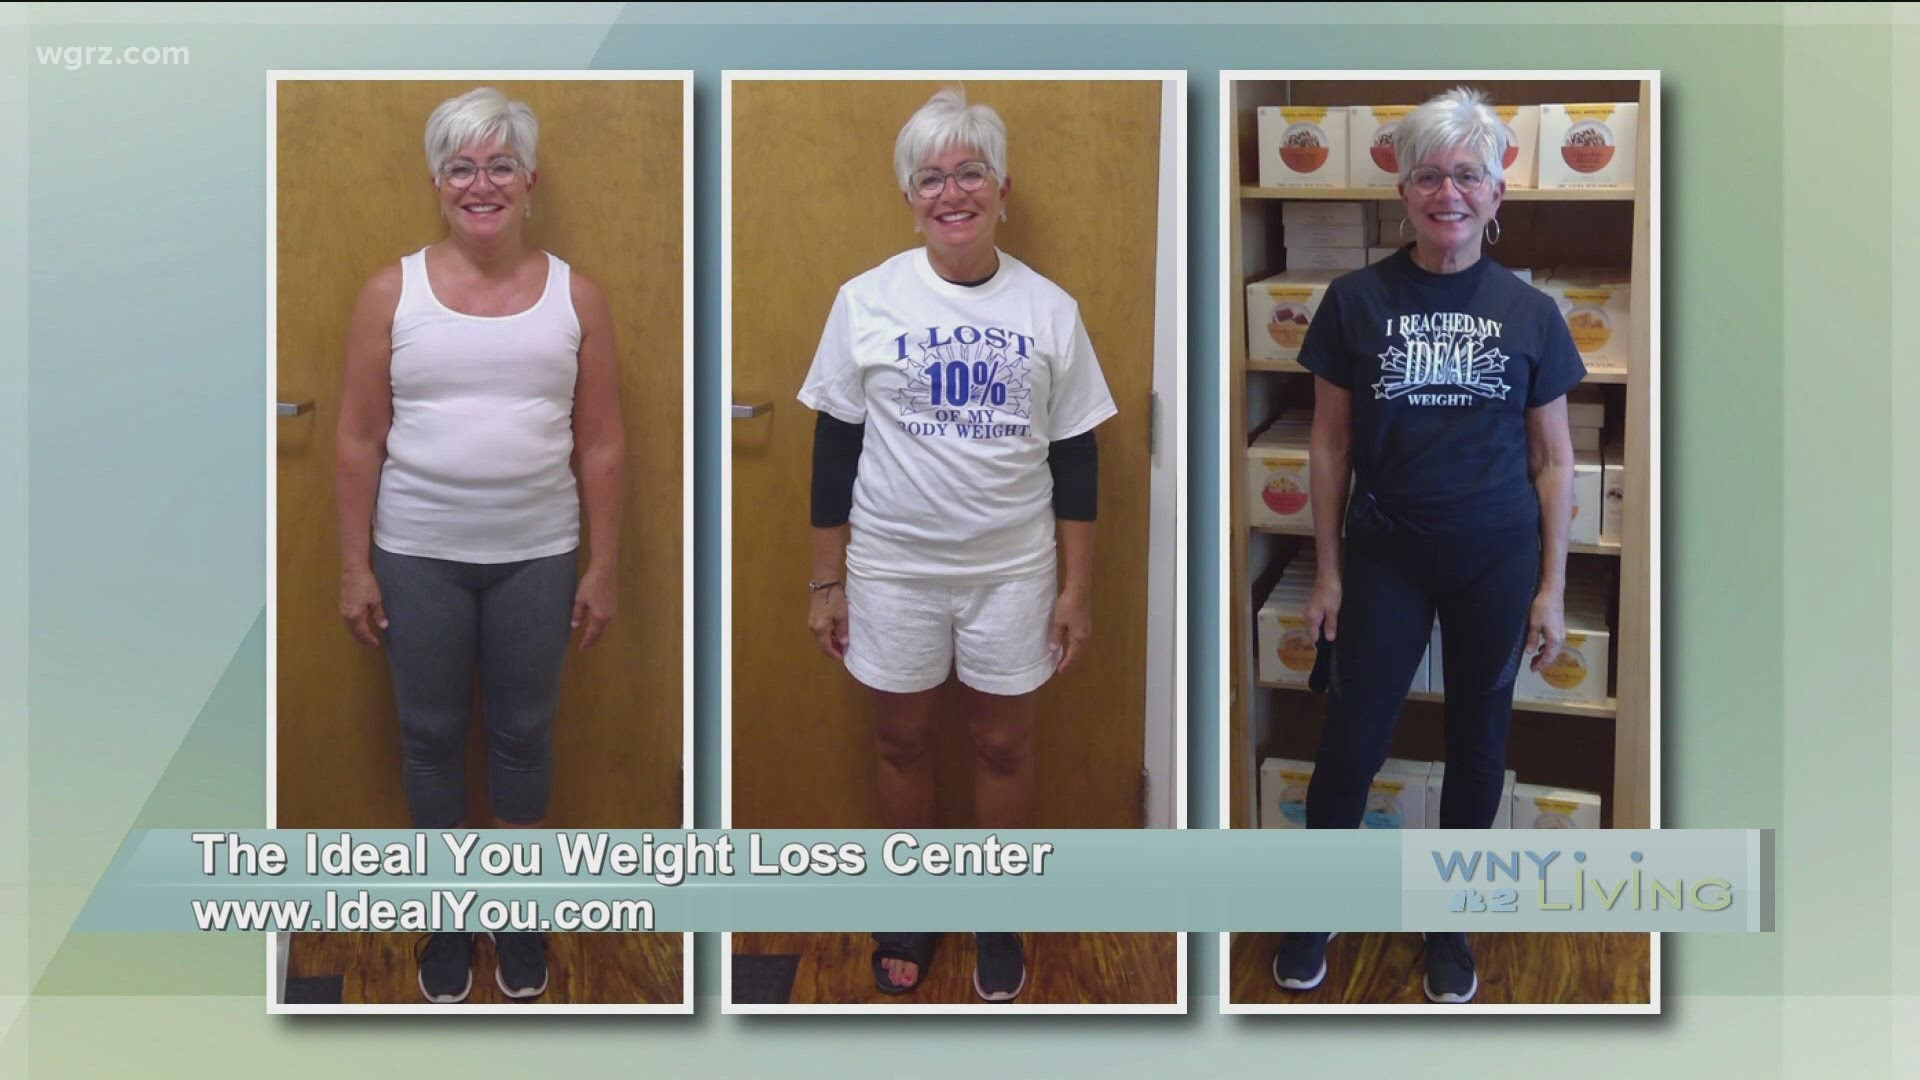 WNY Living - December 19 - The Ideal You Weight Loss Center (THIS VIDEO IS SPONSORED BY THE IDEAL YOU WEIGHT LOSS CENTER)